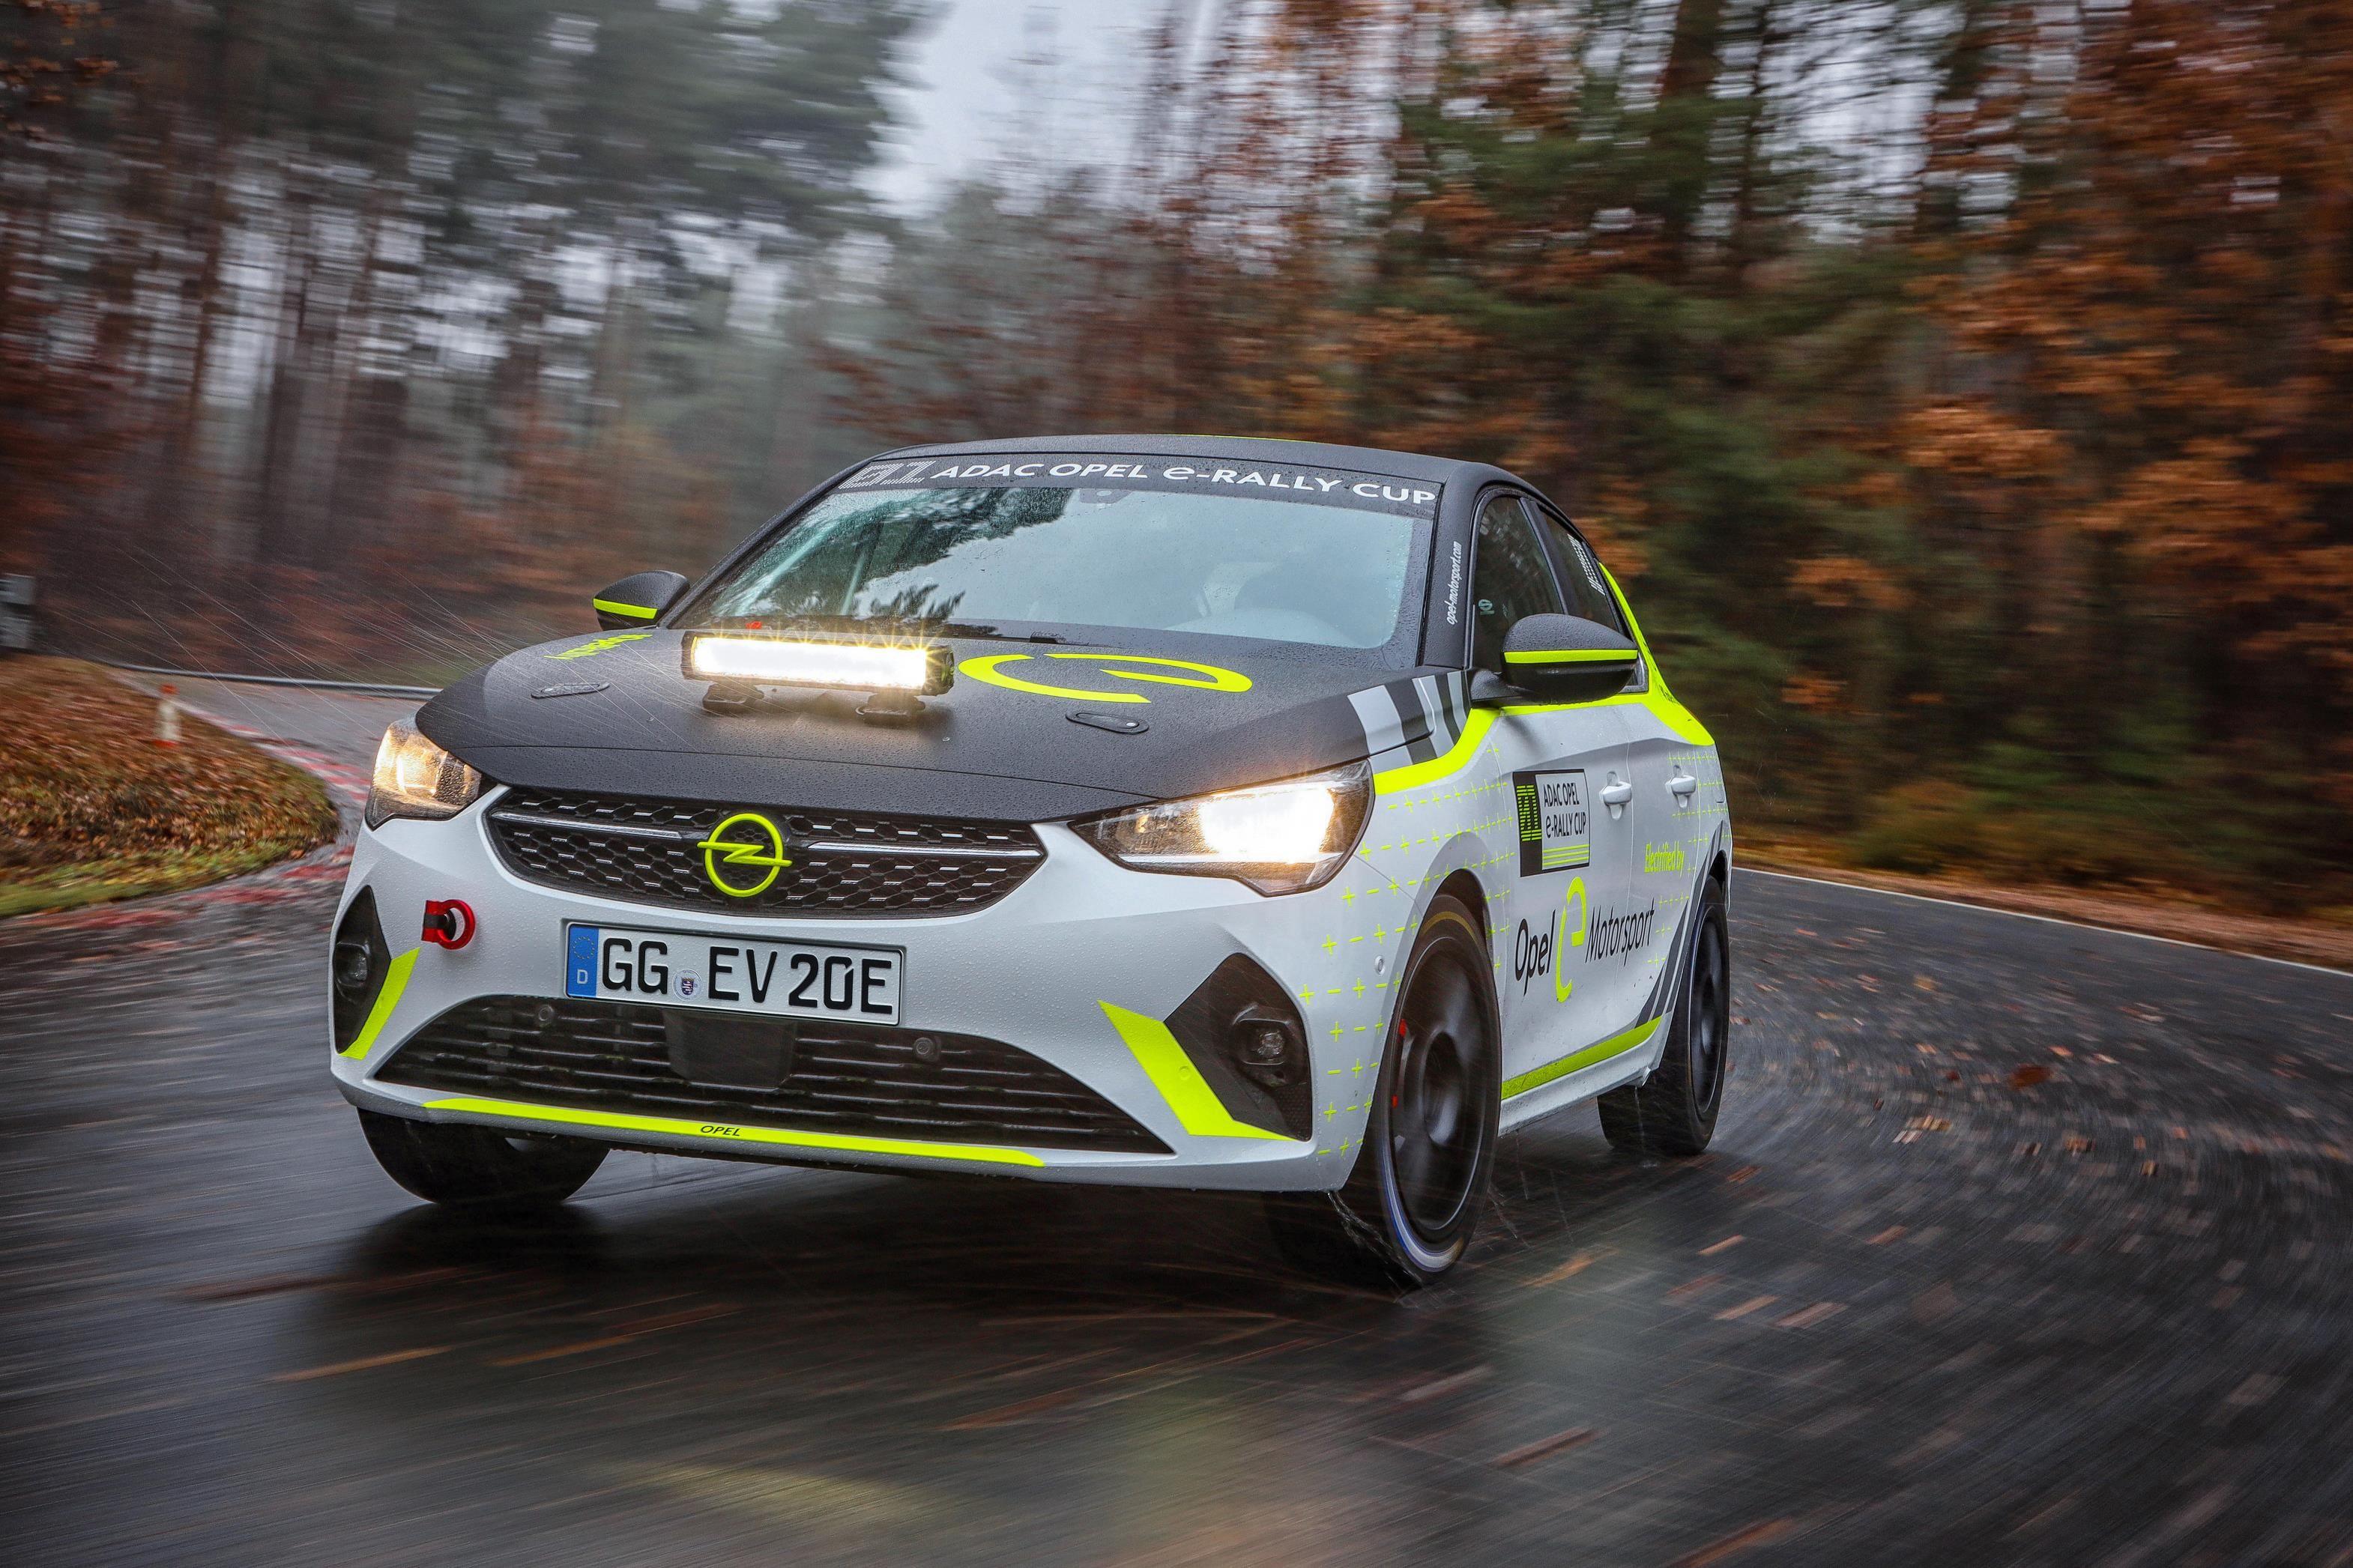 World's First Fully-Electric Rally Car Is the Corsa-E